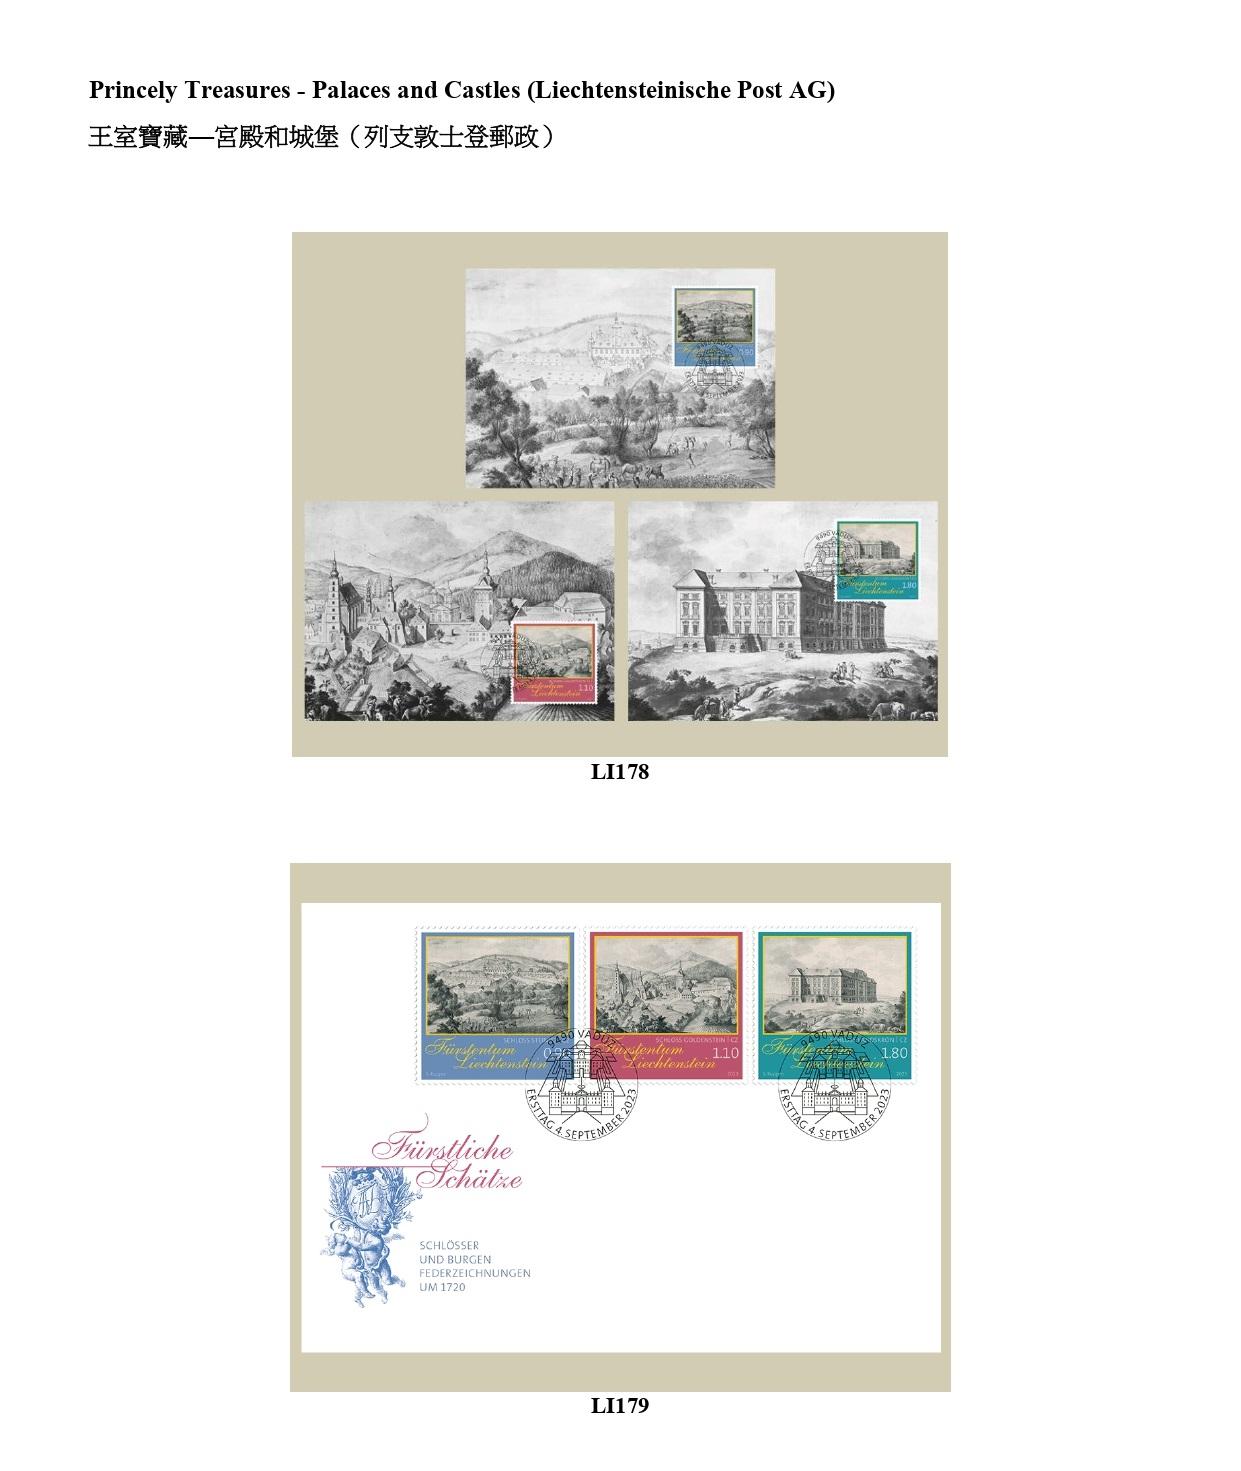 Hongkong Post announced today (January 29) that selected philatelic products issued by Macao Post and Telecommunications and the overseas postal administrations of Australia, Isle of Man, Liechtenstein and New Zealand will be available for sale from February 1 (Thursday). Picture shows philatelic products issued by Liechtensteinische Post AG.


